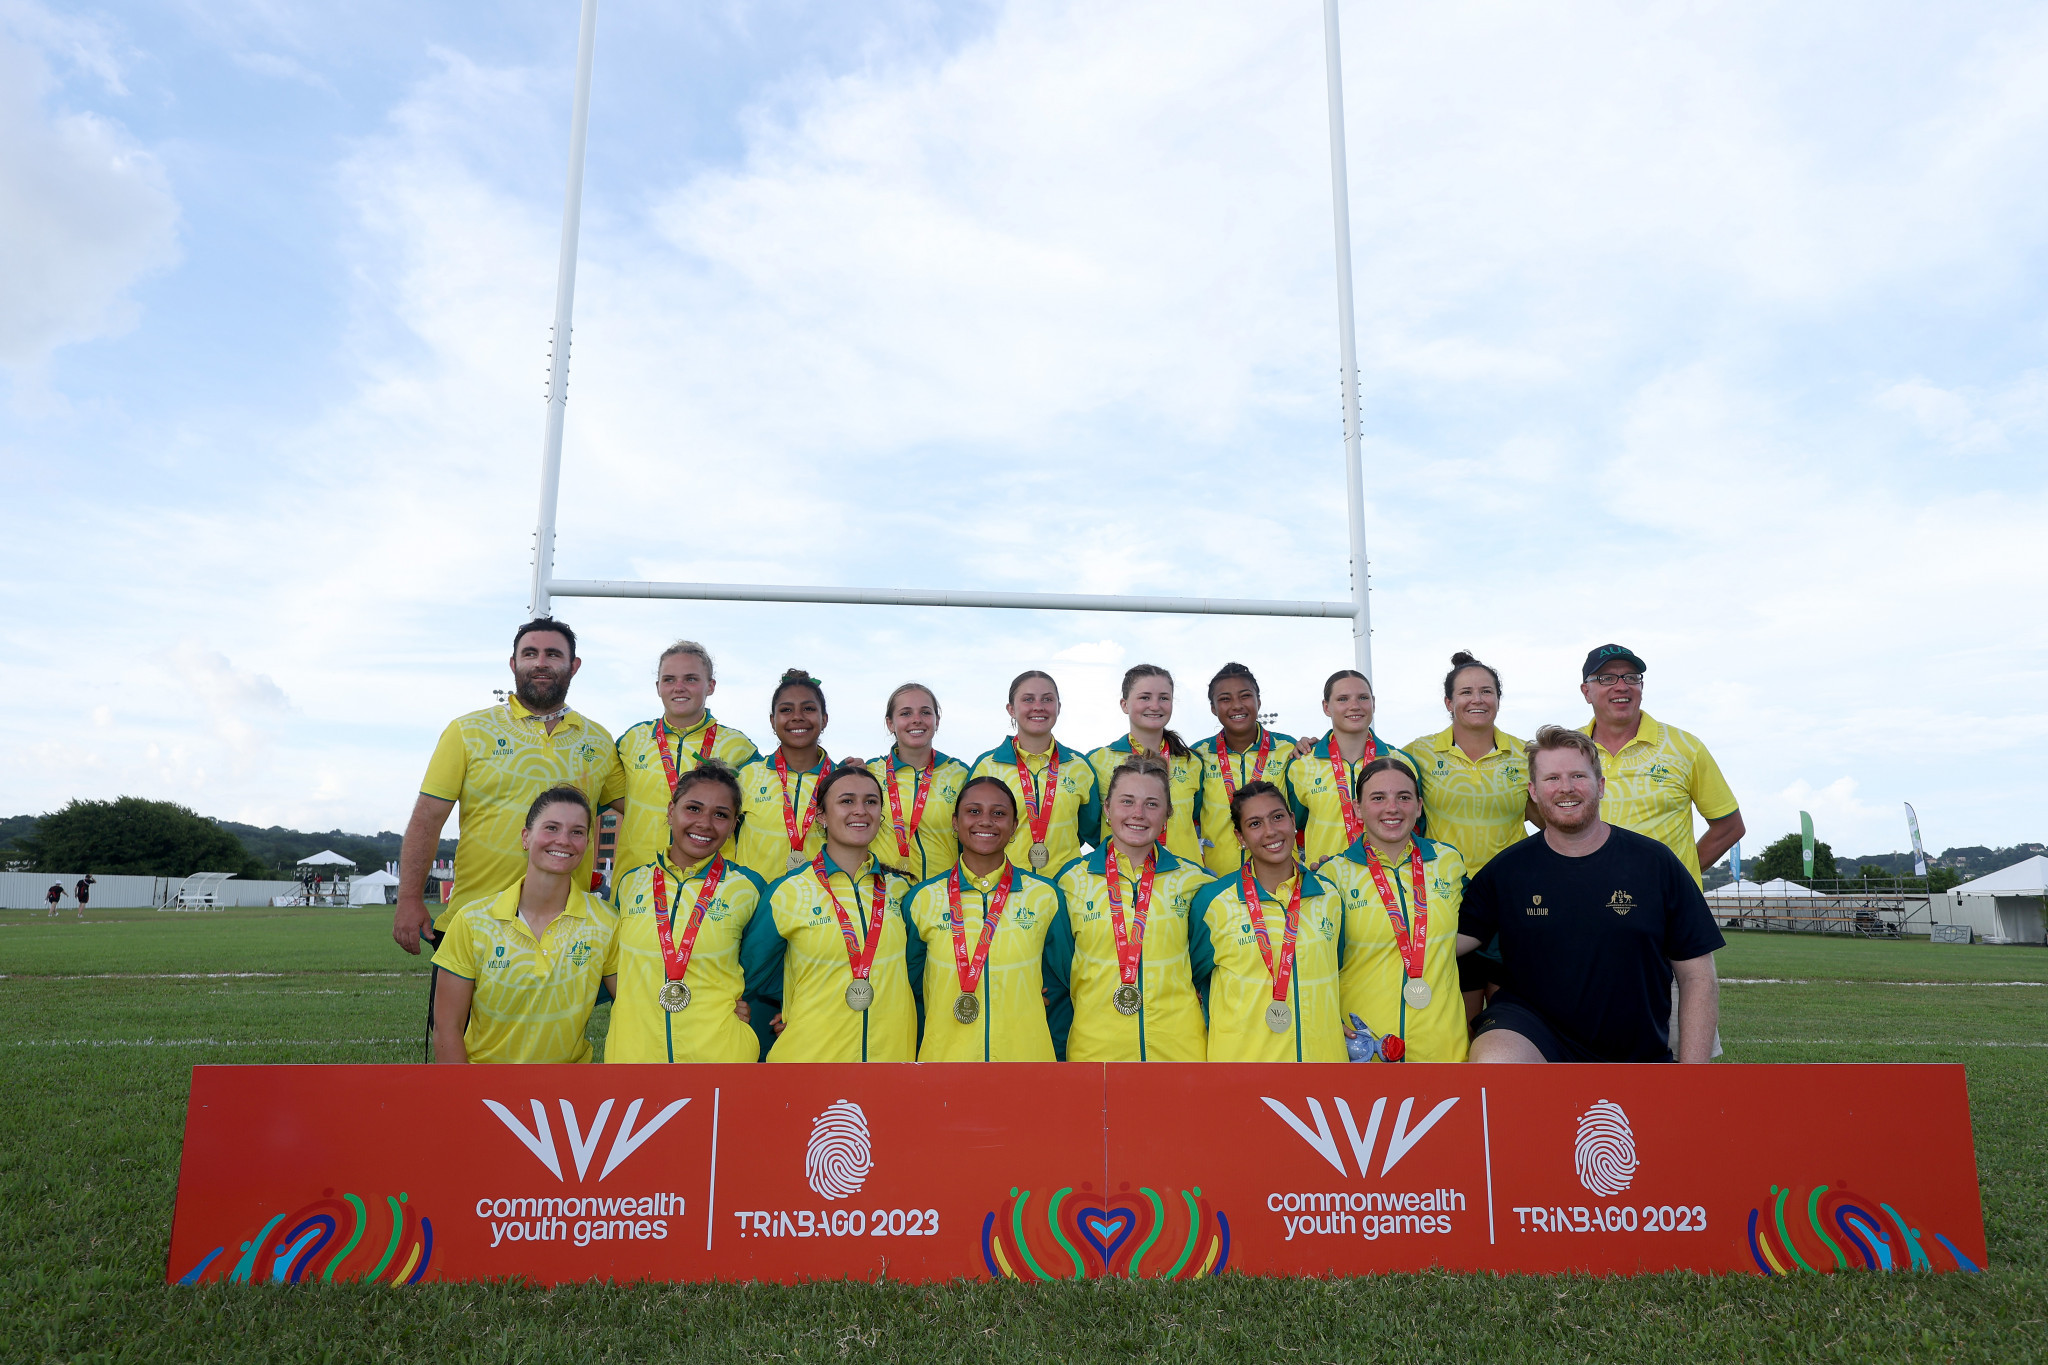 Australia dominated the women's rugby sevens at the Commonwealth Youth Games and defended their title ©Getty Images